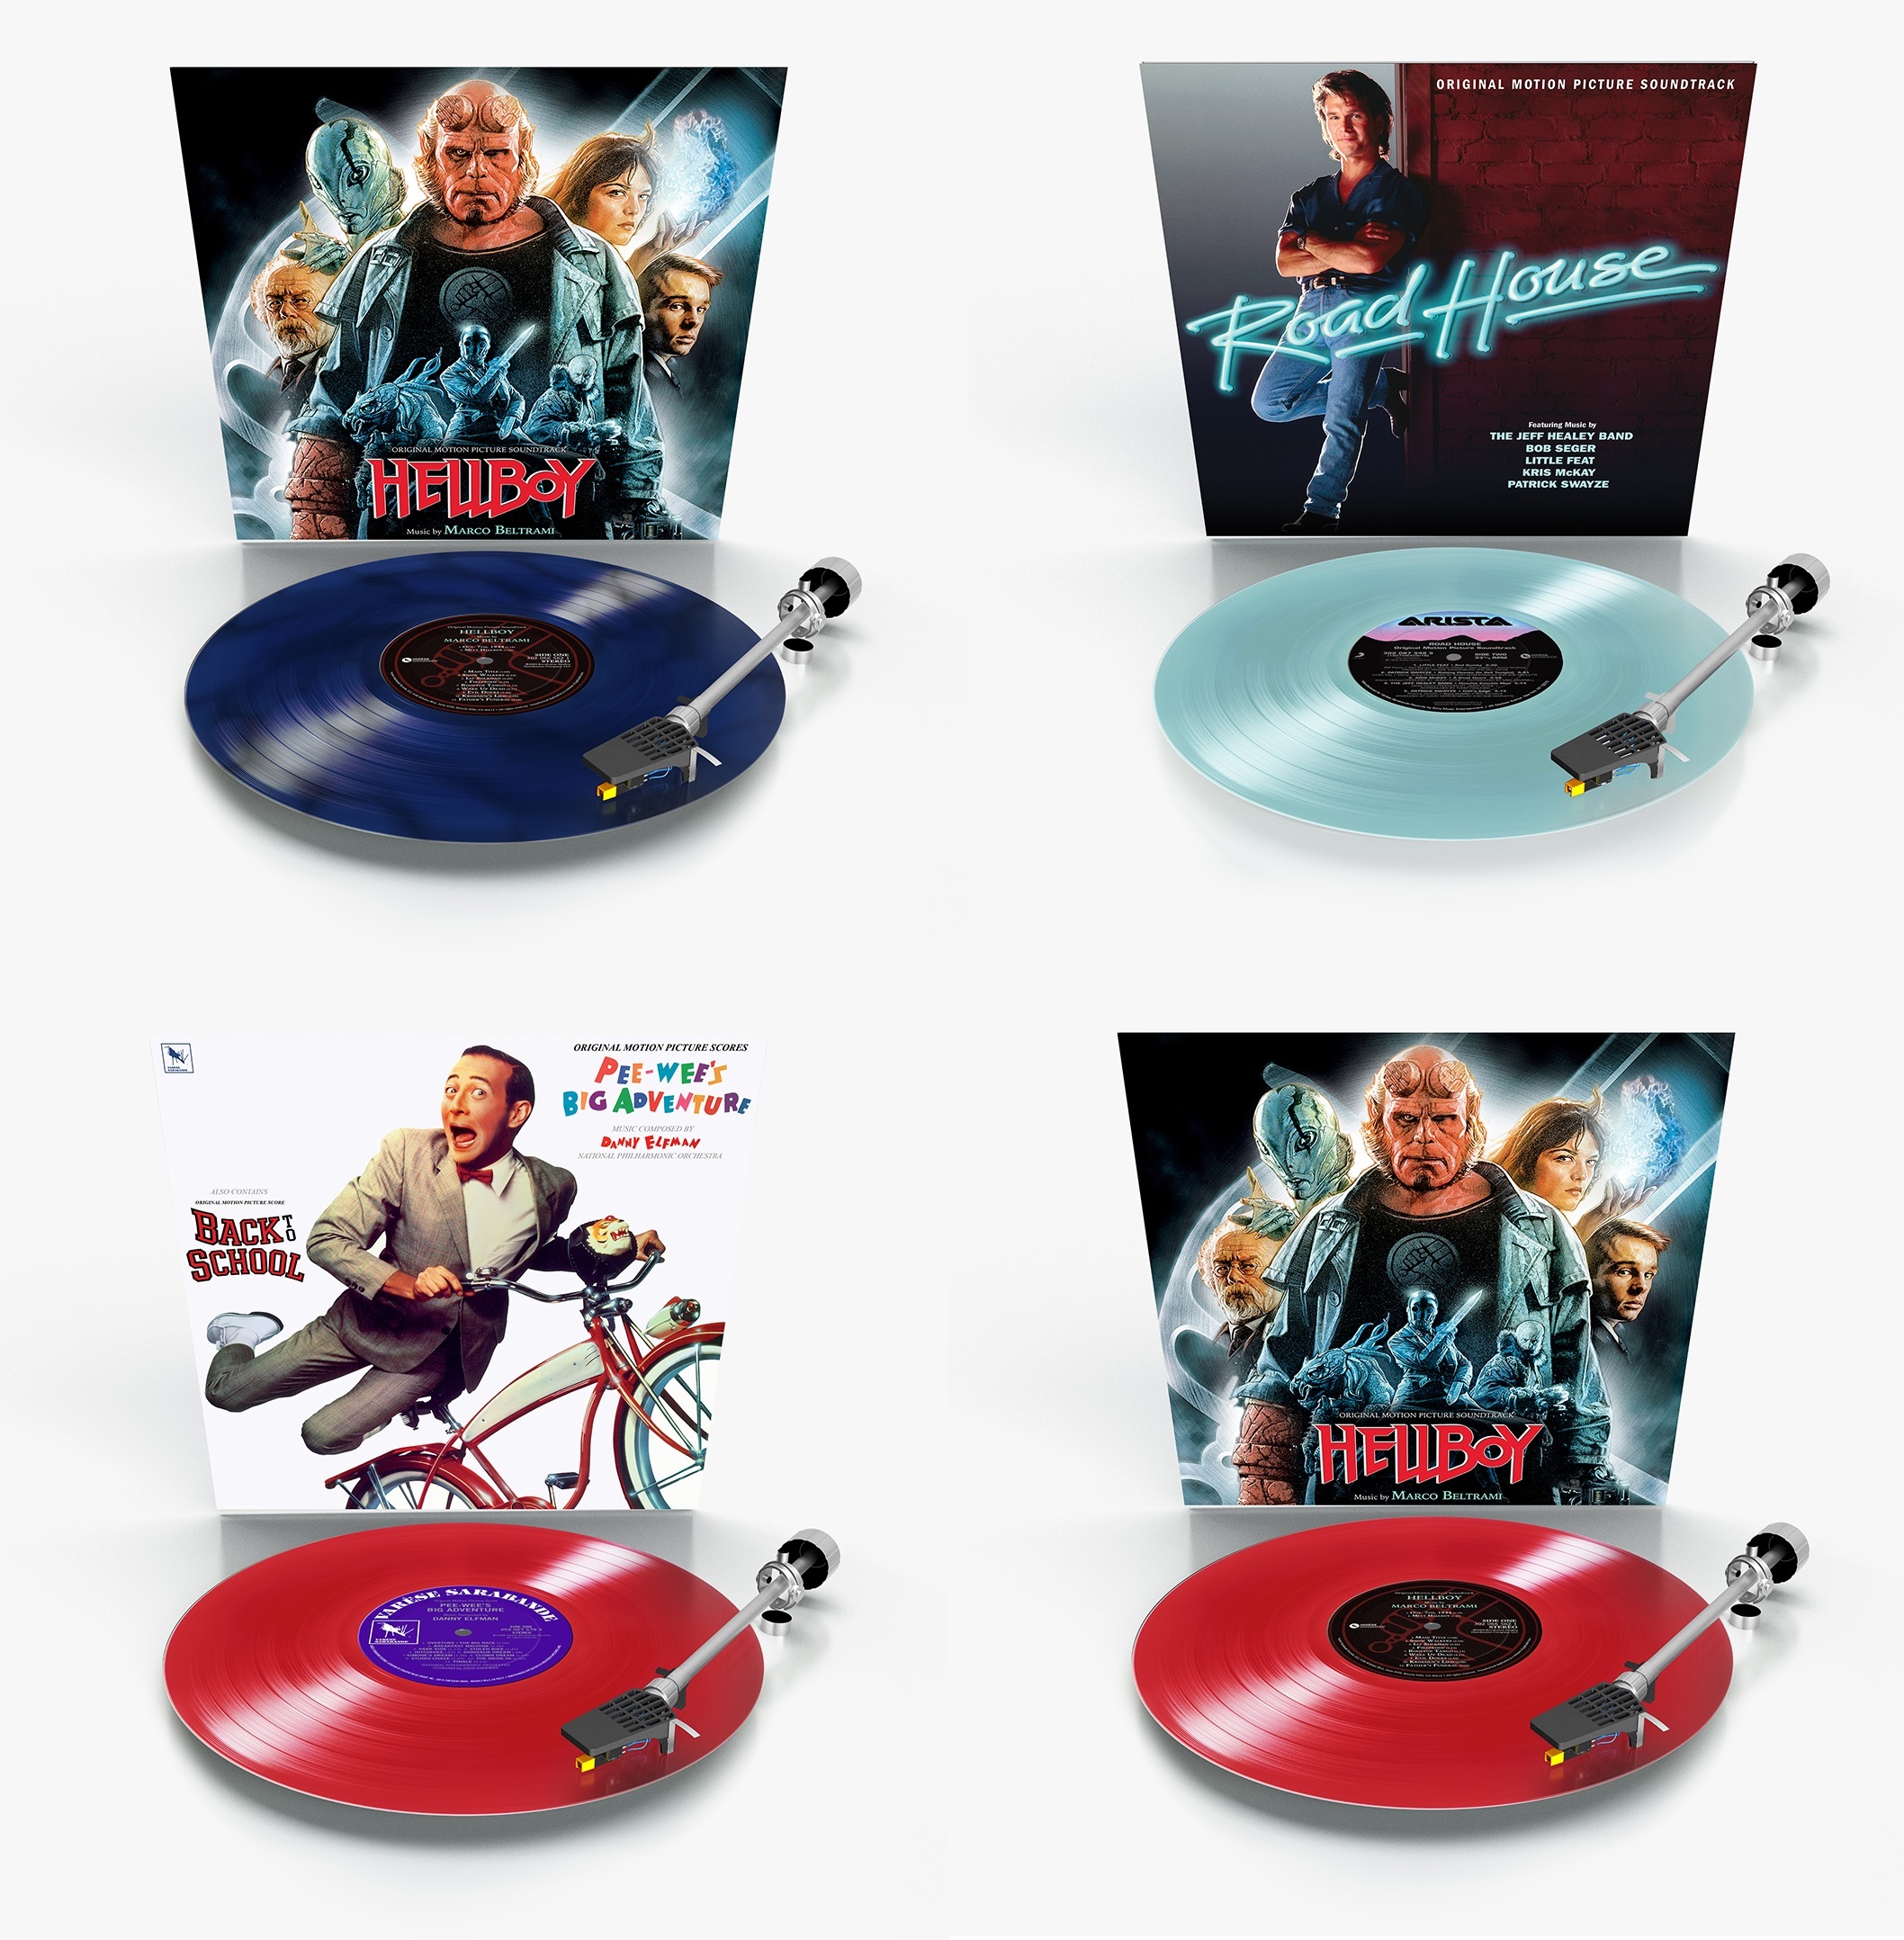 Varese Sarabande announces 3 new collectable vinyl packages exclusive to Barnes & Noble